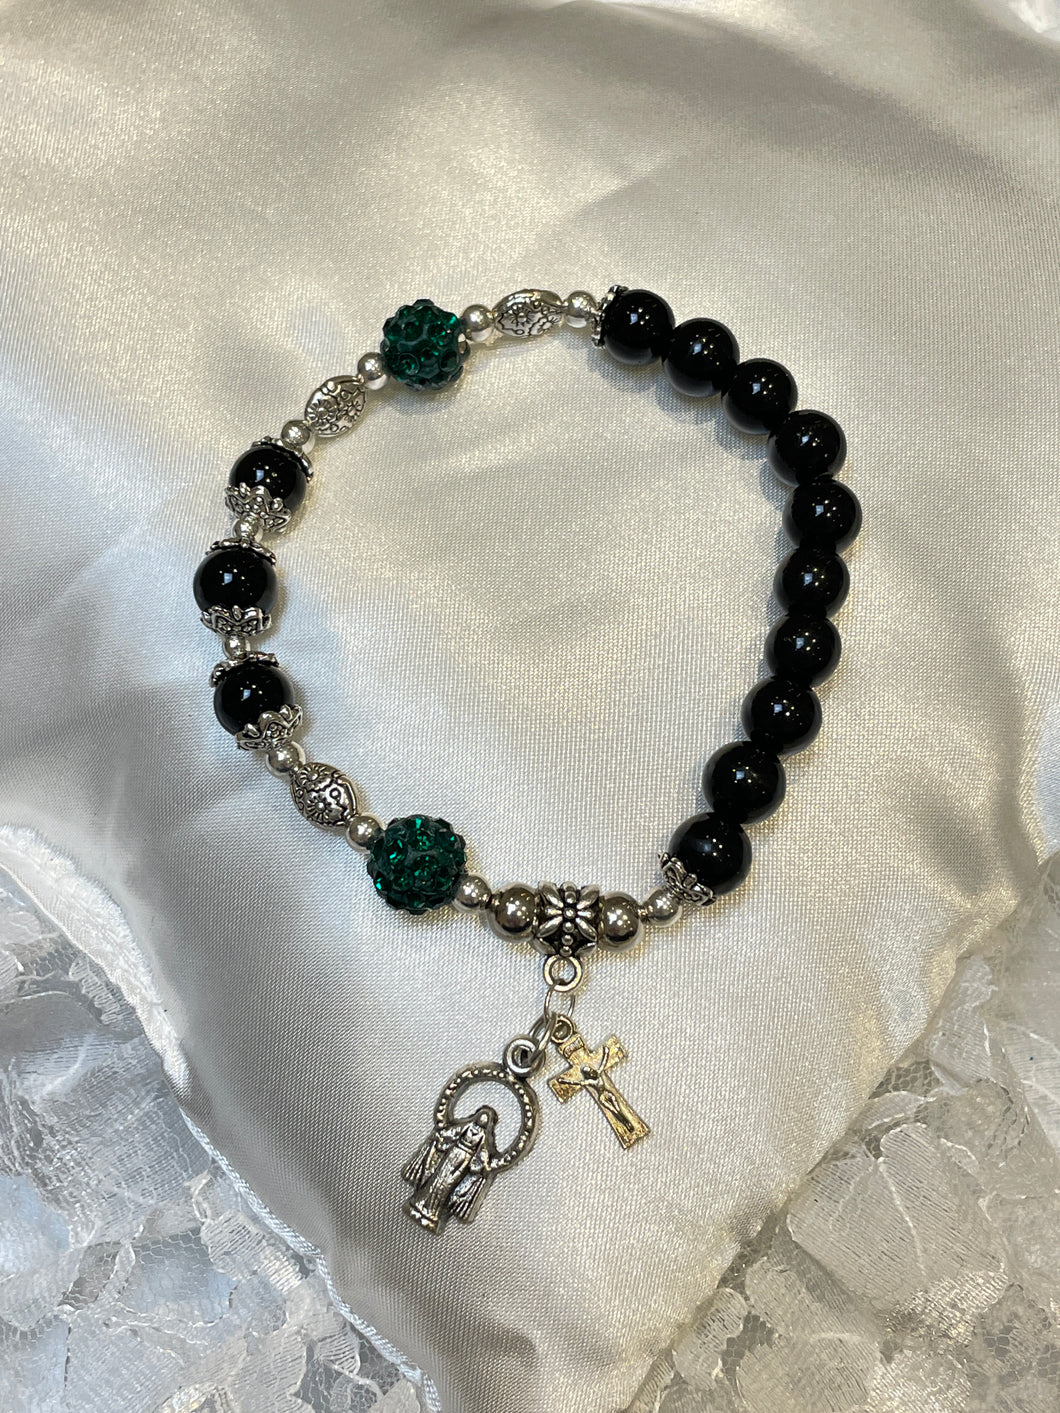 Black Gemstone and Emerald Green Rosary Bracelet with Charms